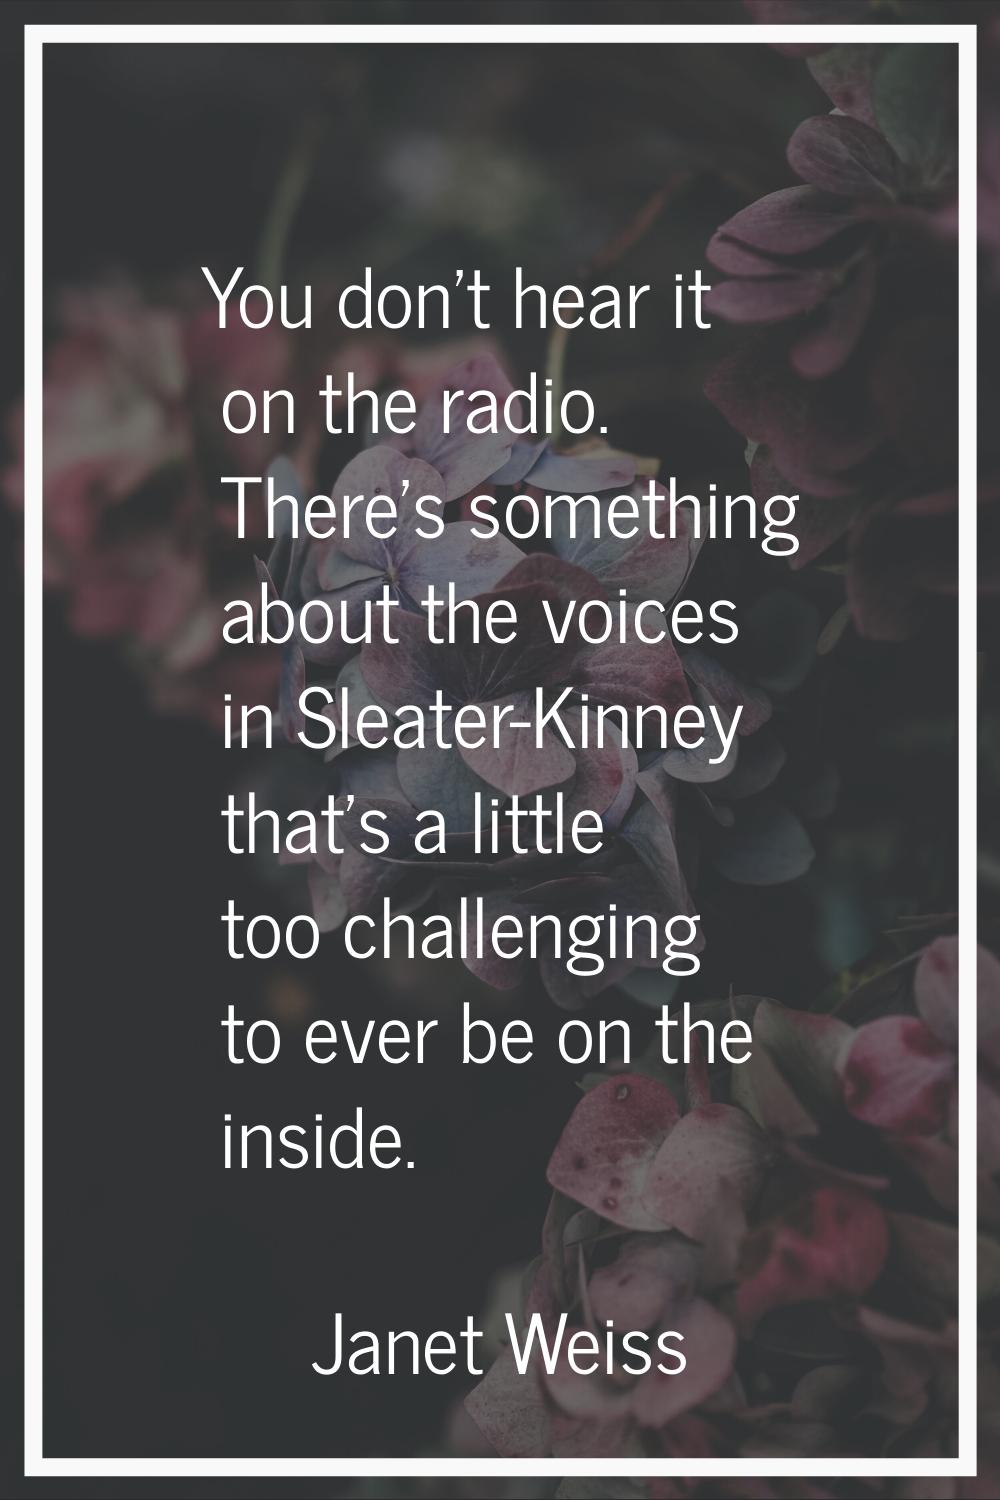 You don't hear it on the radio. There's something about the voices in Sleater-Kinney that's a littl